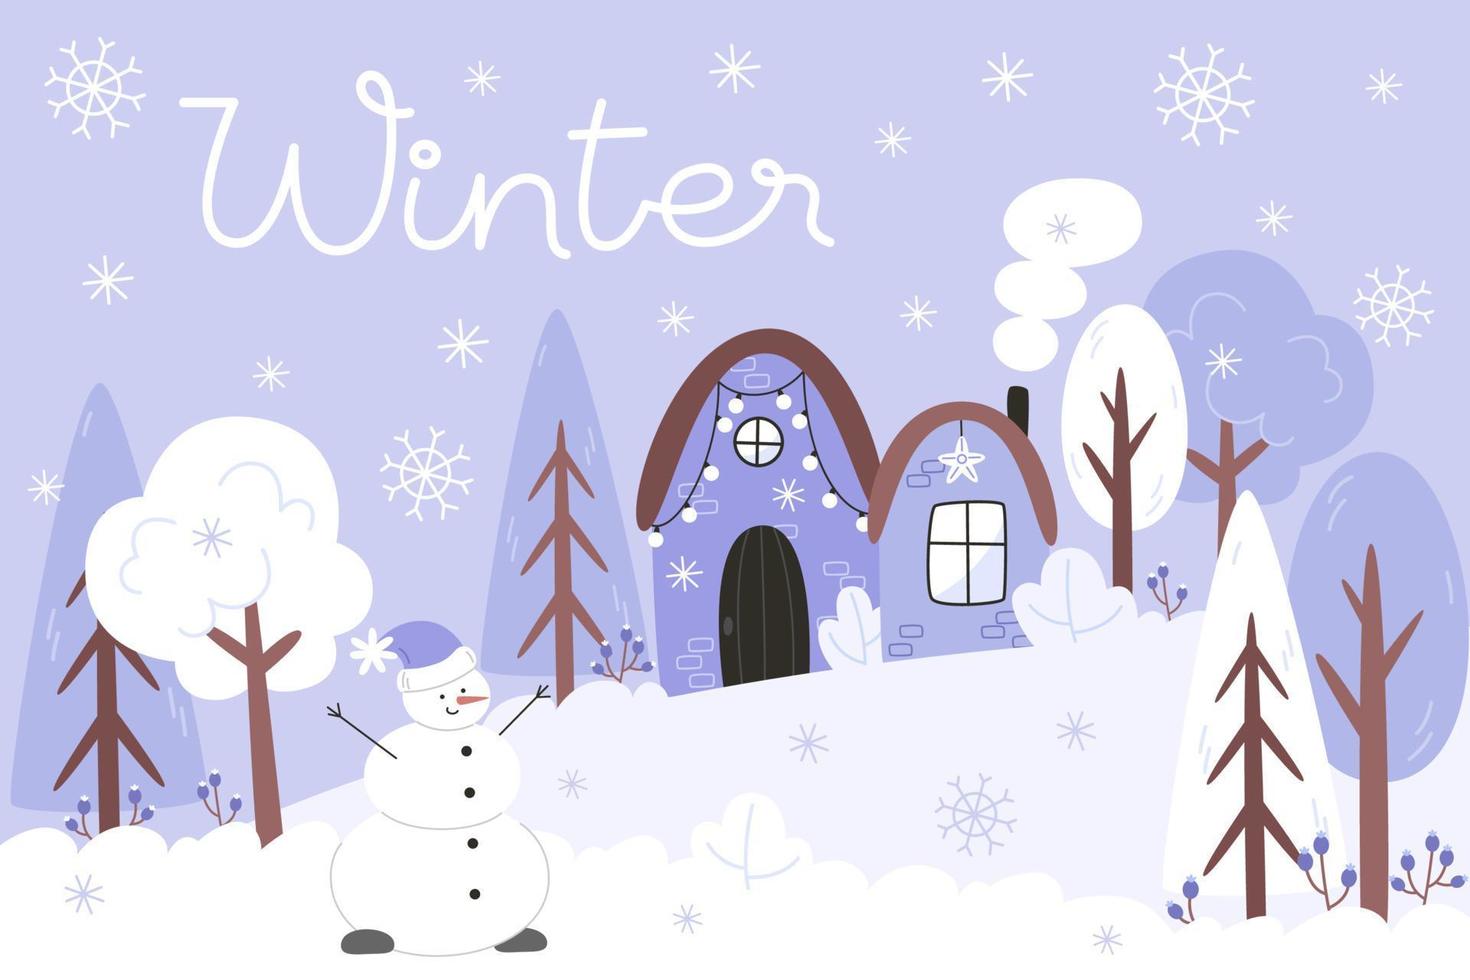 Winter landscape with a snowy forest, house and snownan in a flat style vector